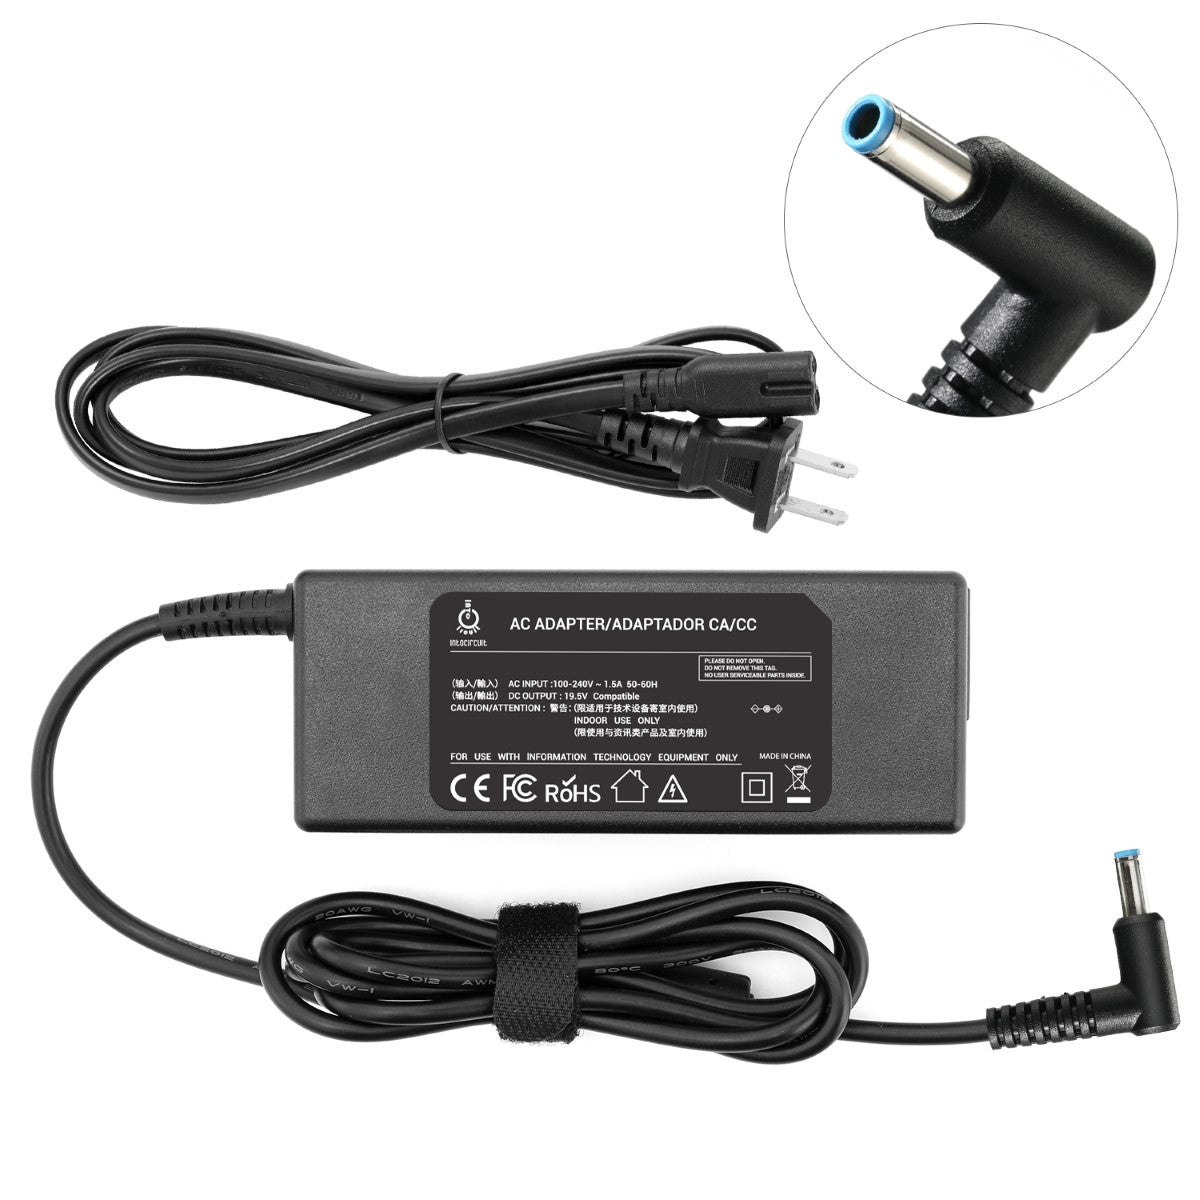 Charger for HP x360 11-p120nr Convertible Laptop